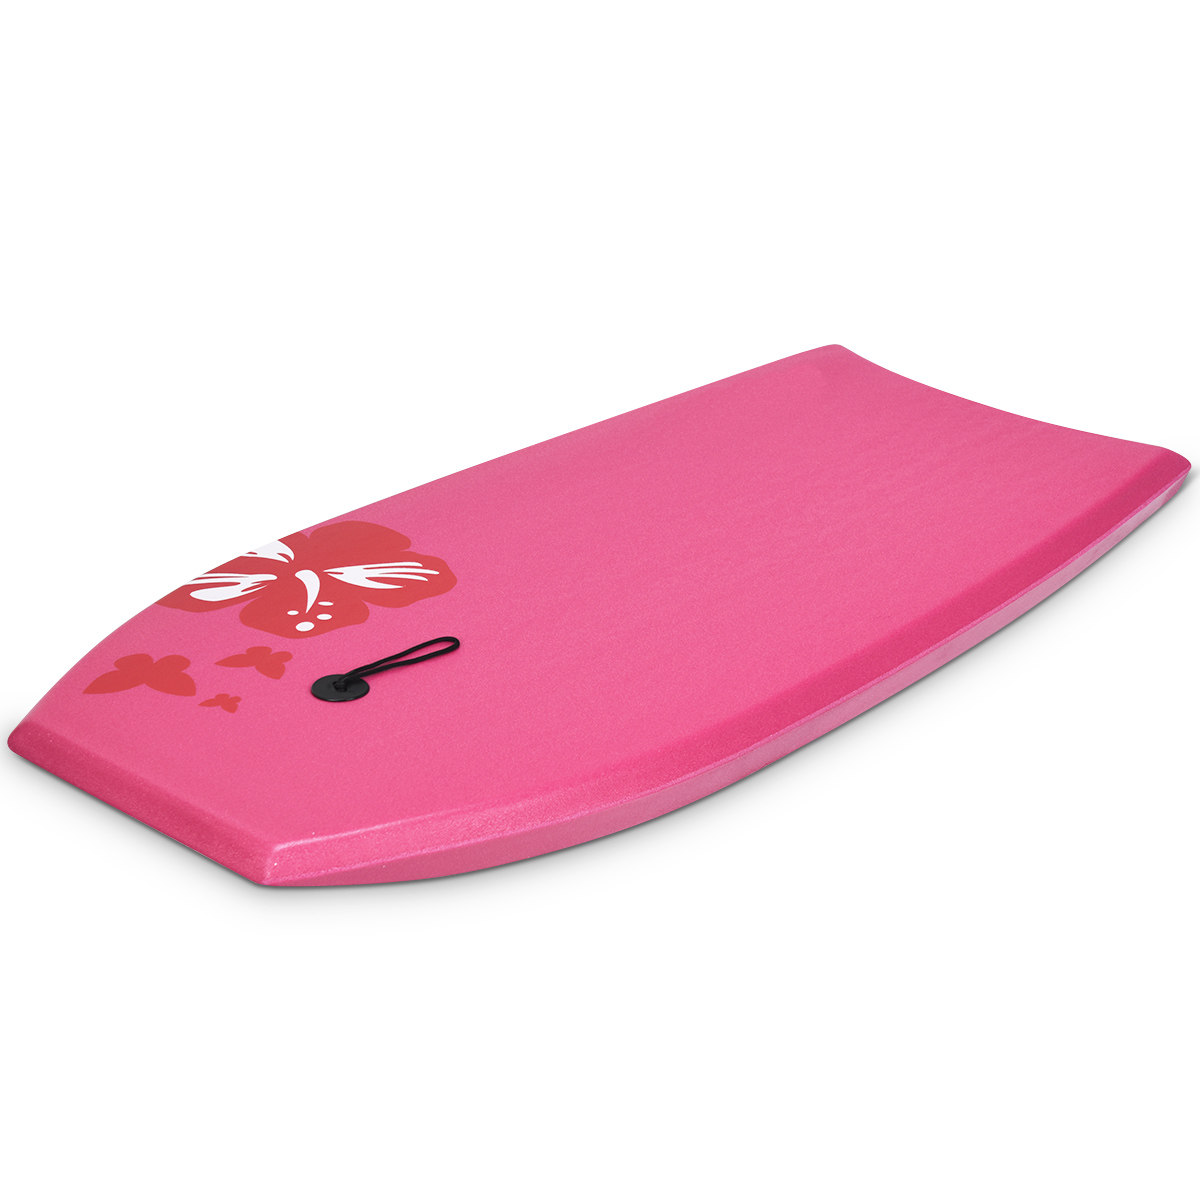 COSTWAY Stand Rosa Up Bodyboard Paddle,